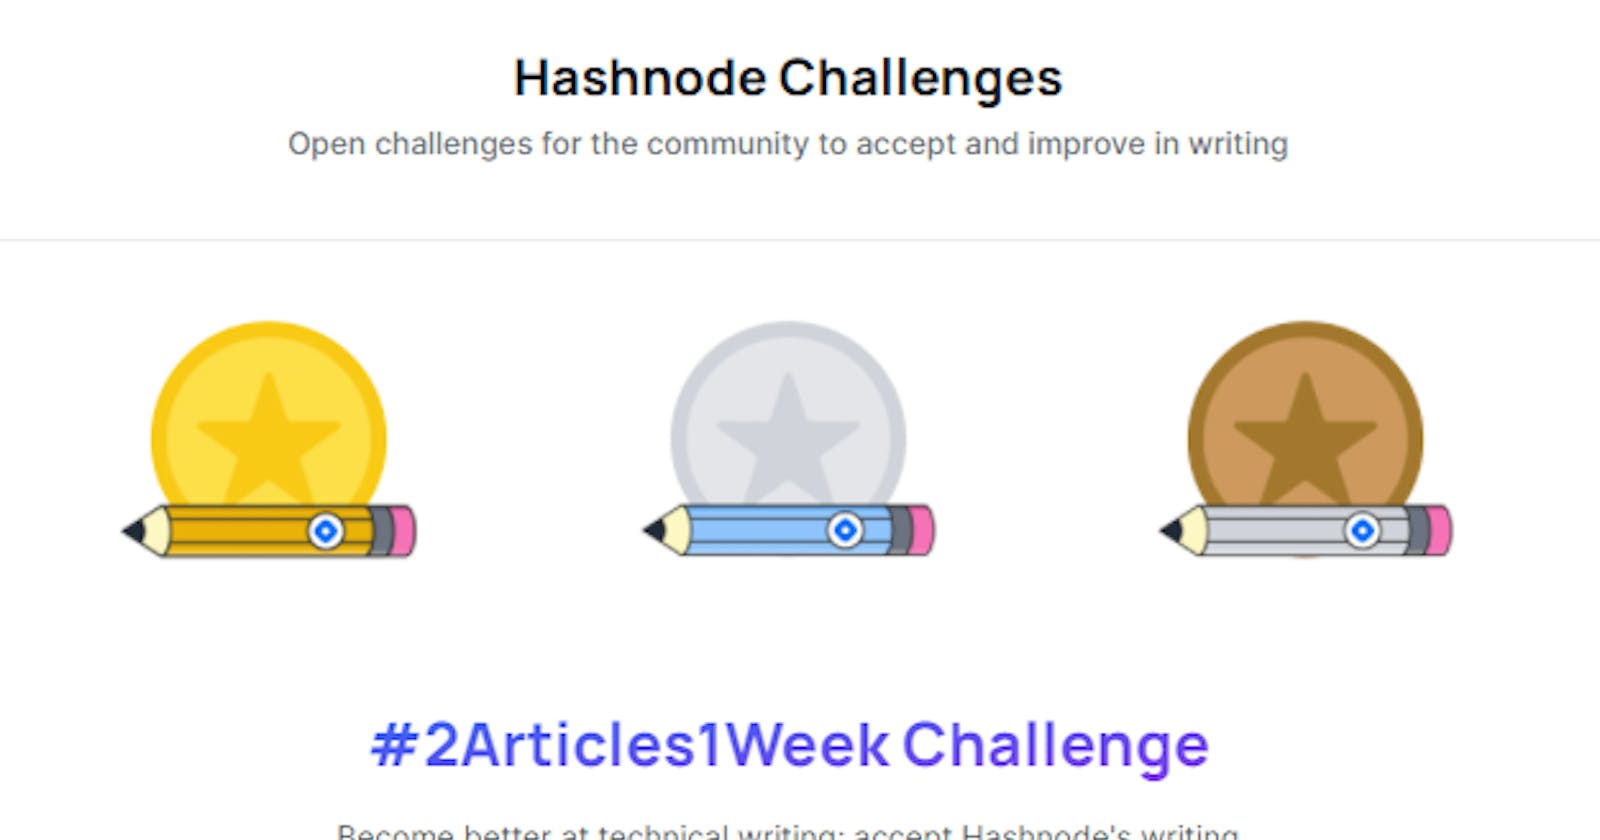 My Experience of Participating in #2Article1Week Challenge